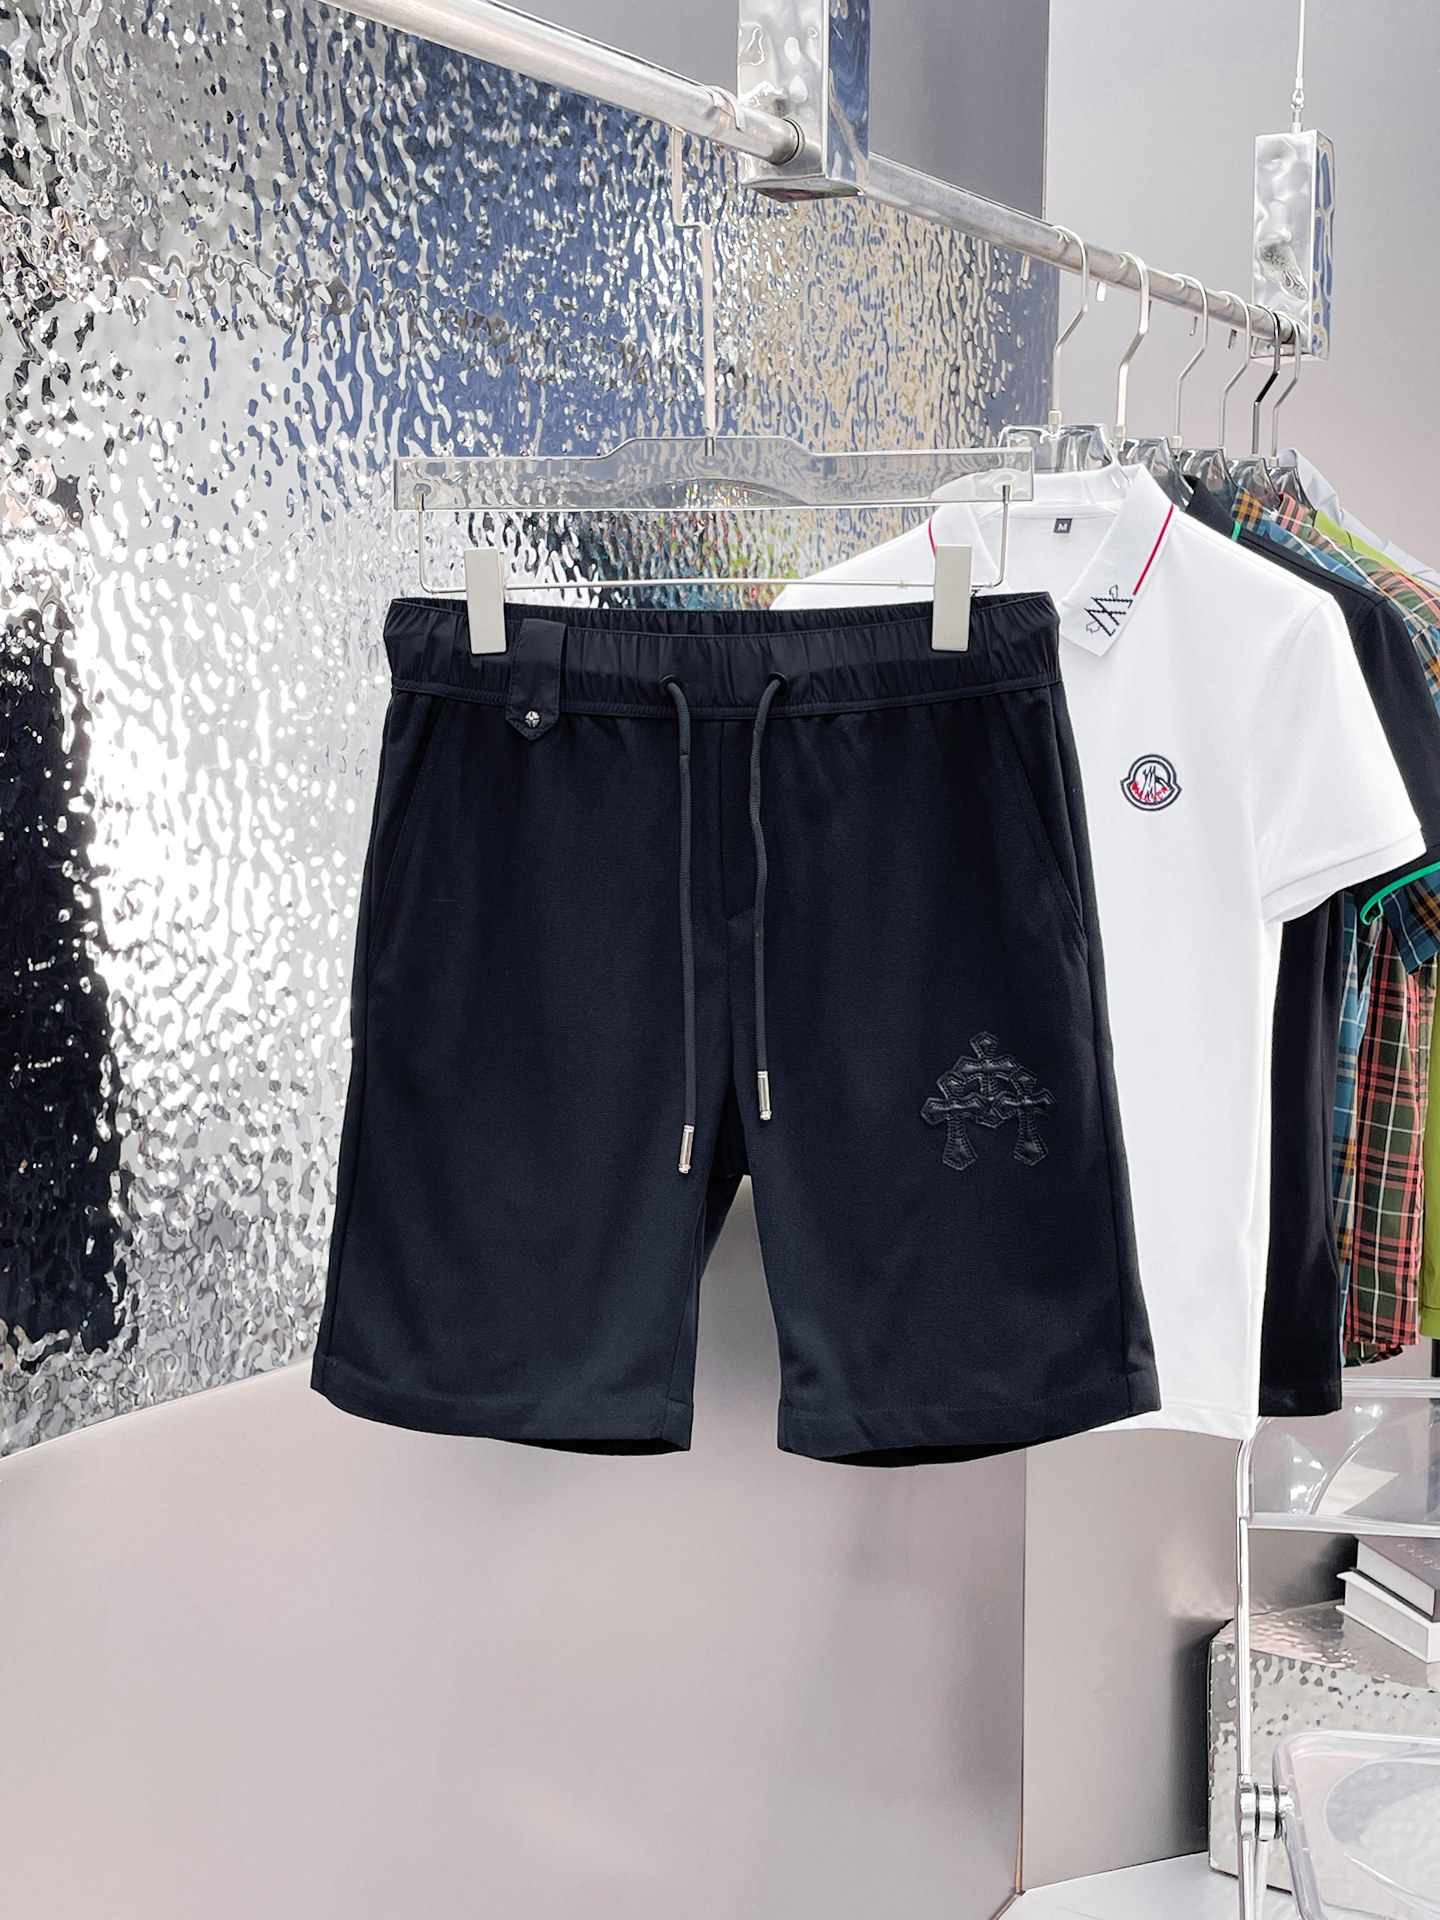 Chrome Hearts Clothing Shorts Men Summer Collection Casual